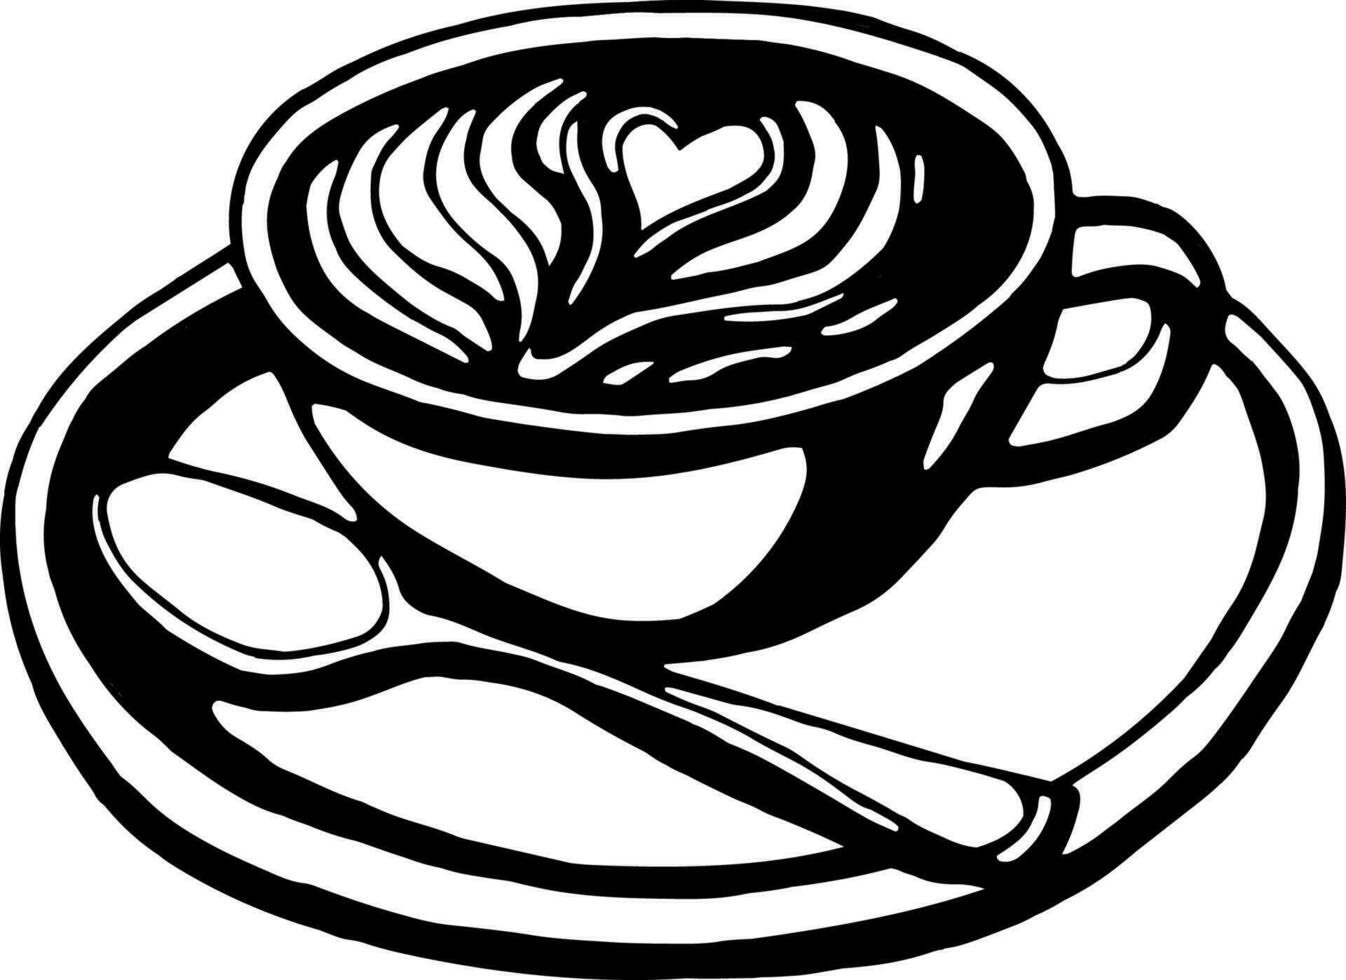 Cup of coffee with froth like a heart on a plate with a spoon vector